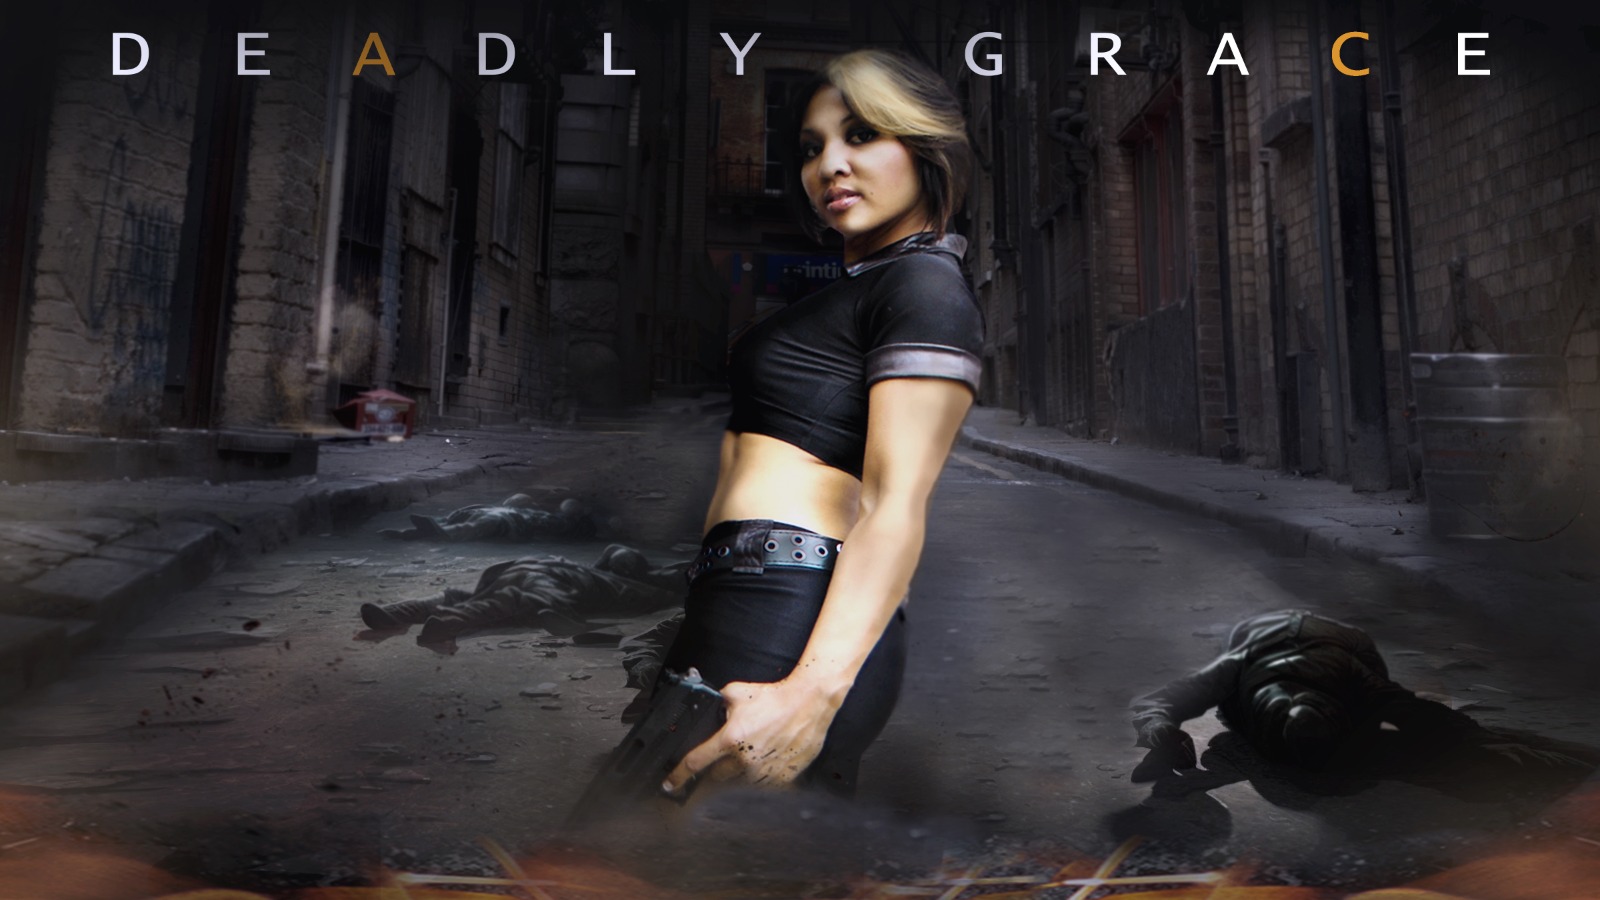 DeadlyGrace | Deadly Grace | DEADLY GRACE: HARD-HITTING ACTION